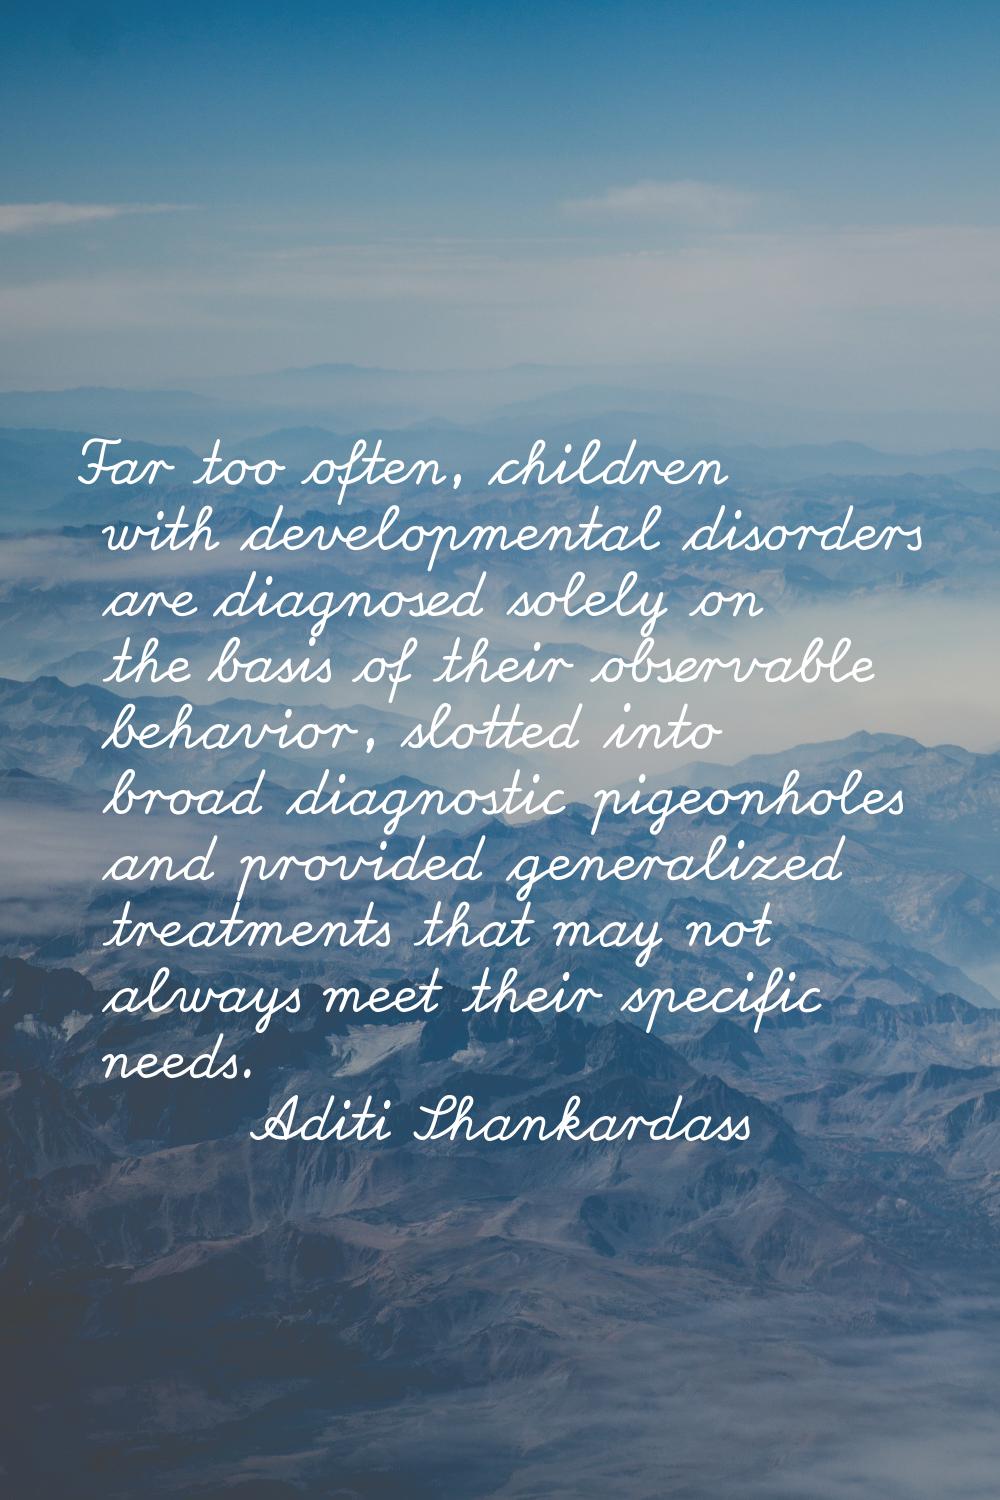 Far too often, children with developmental disorders are diagnosed solely on the basis of their obs